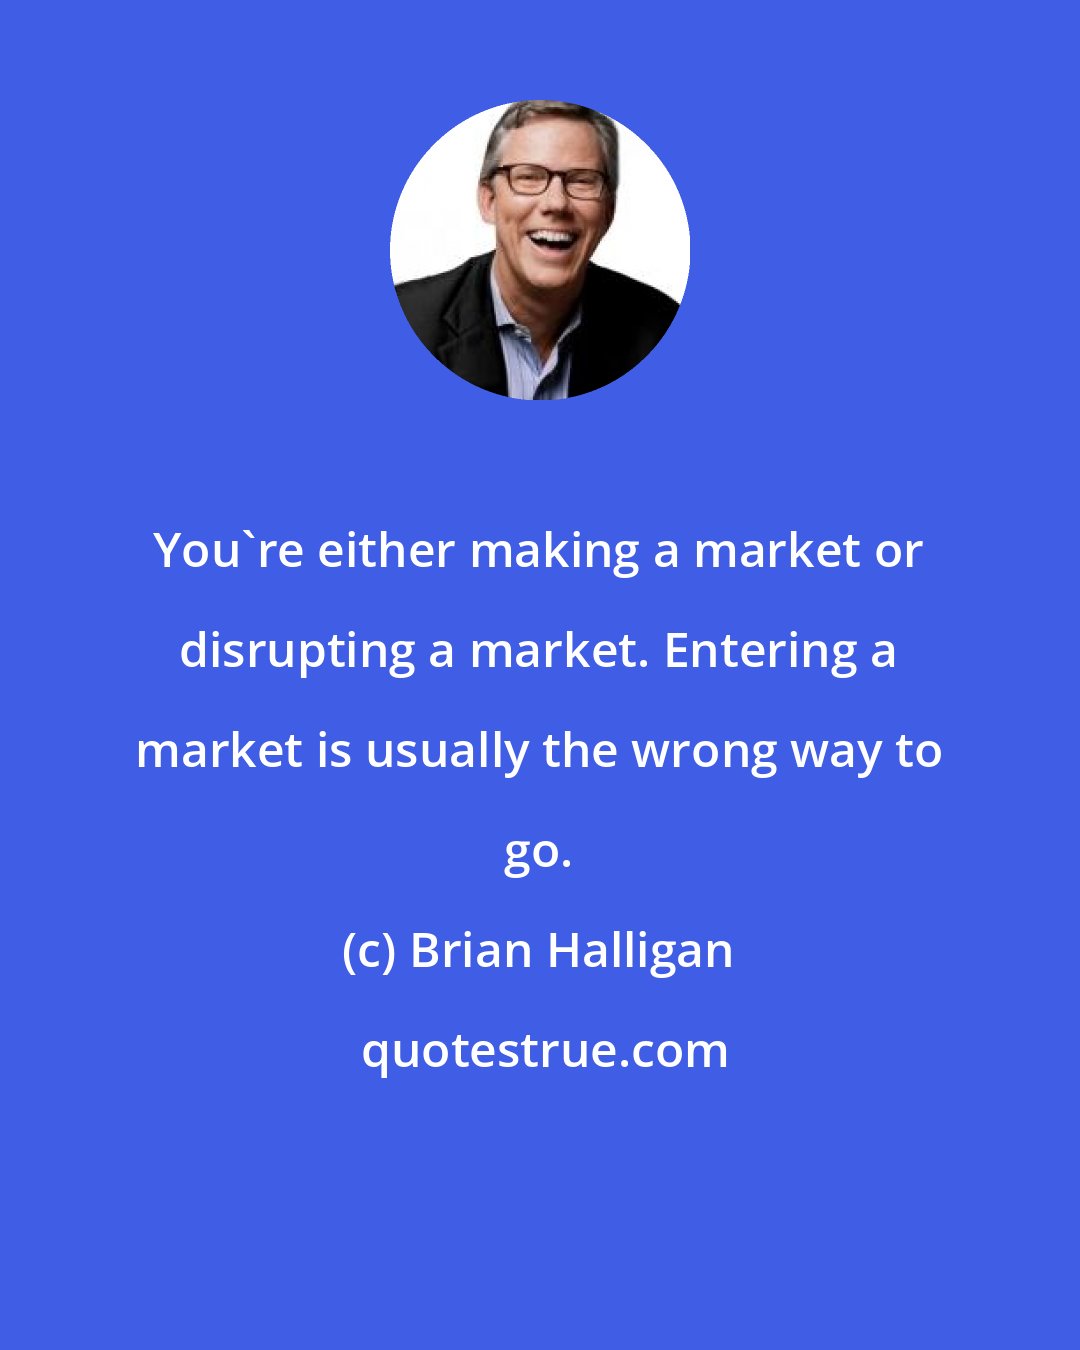 Brian Halligan: You're either making a market or disrupting a market. Entering a market is usually the wrong way to go.